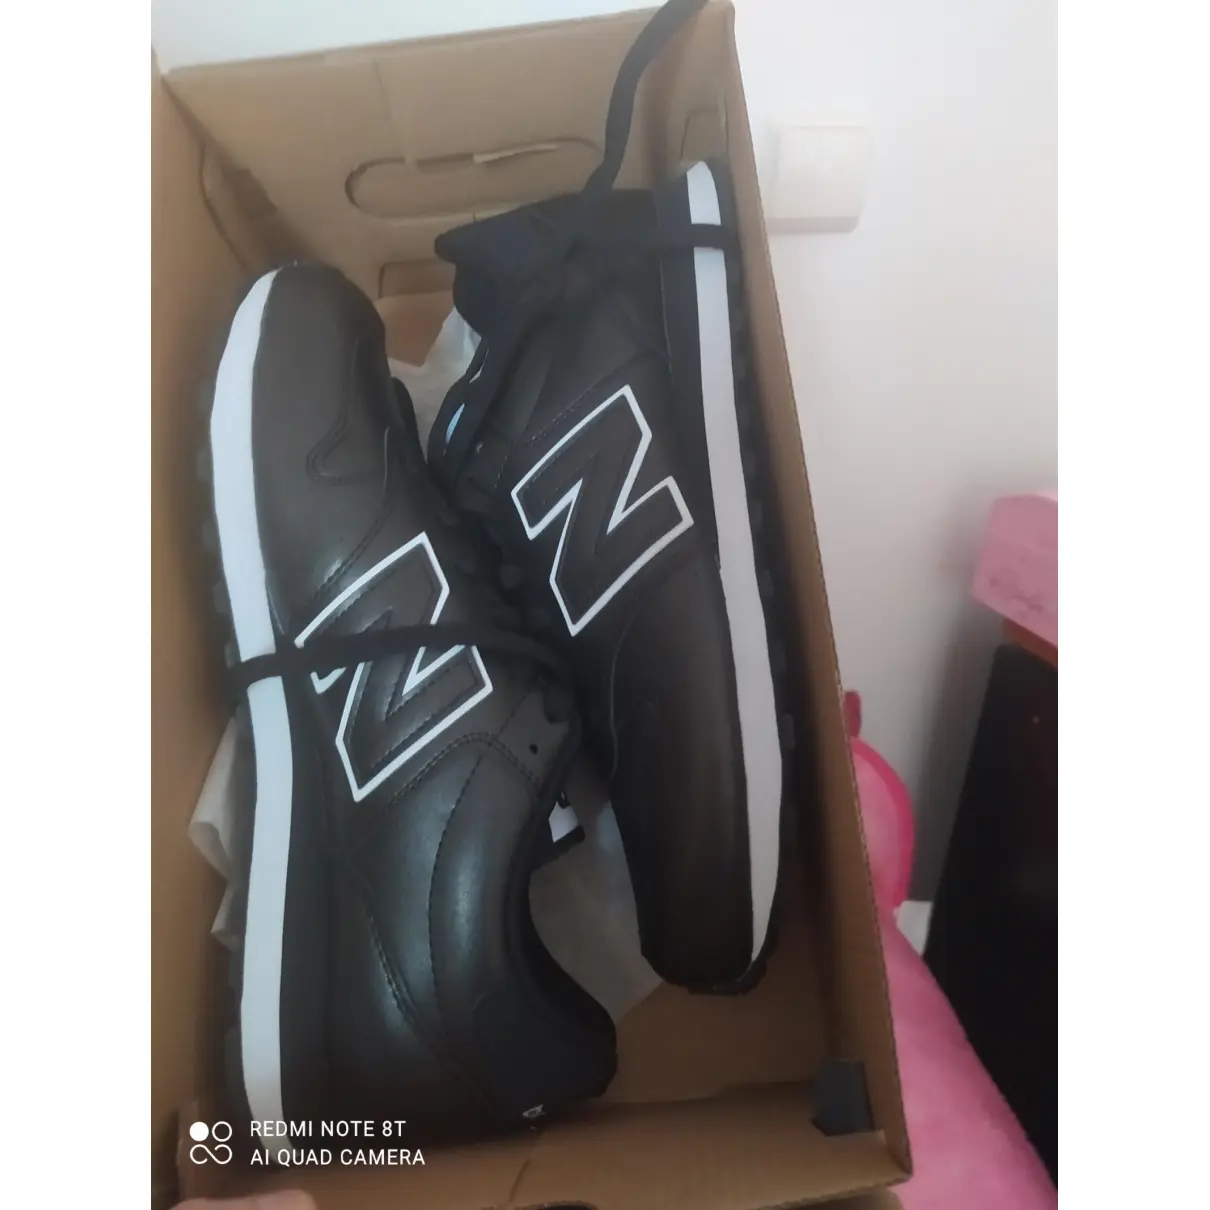 Leather trainers New Balance